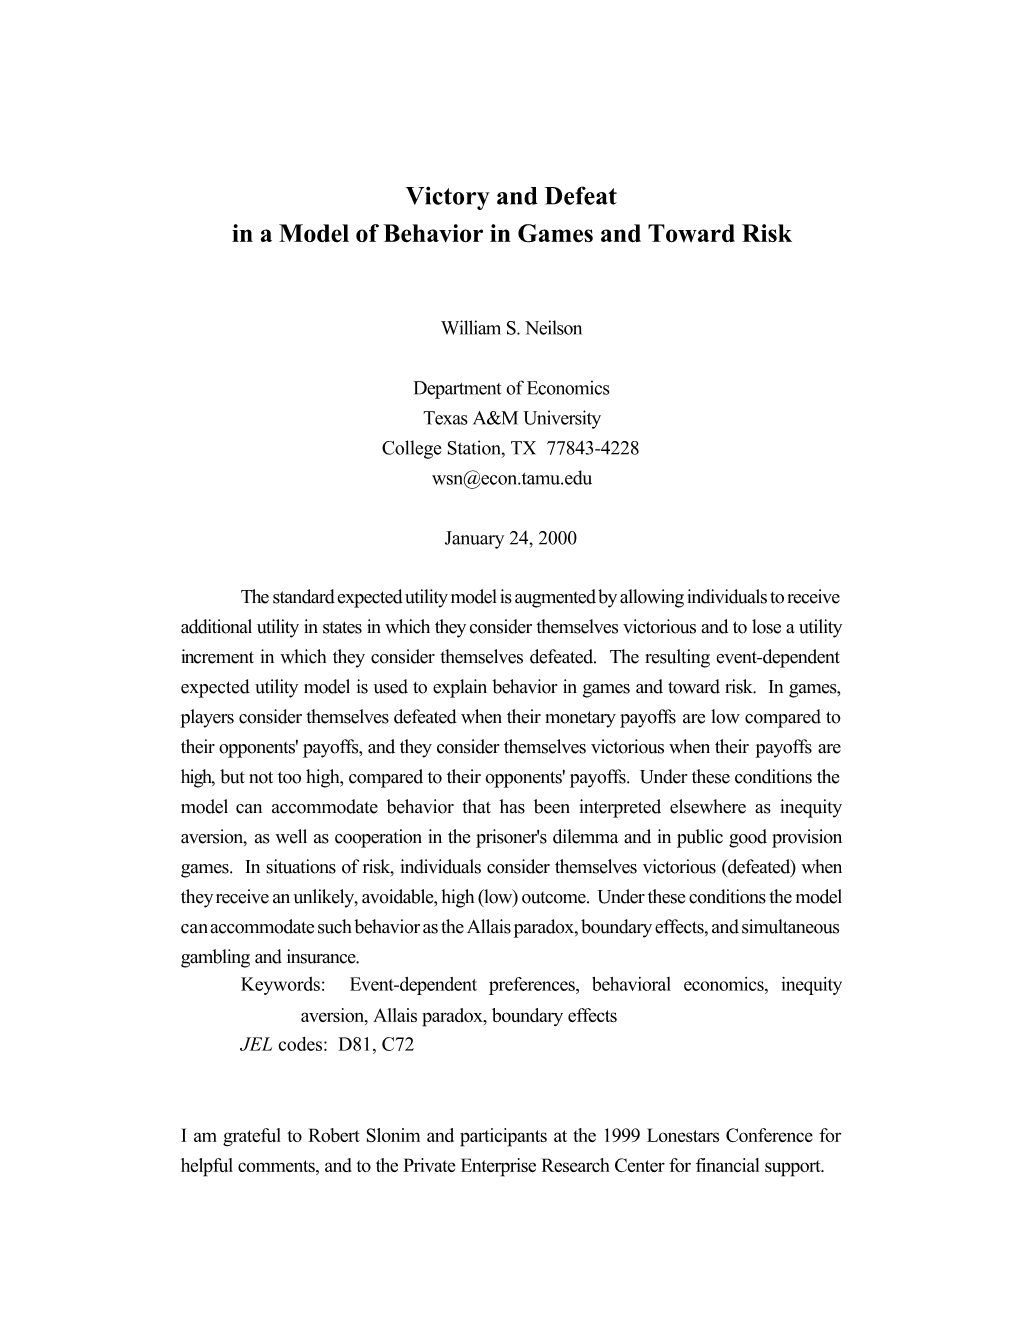 Victory and Defeat in a Model of Behavior in Games and Toward Risk